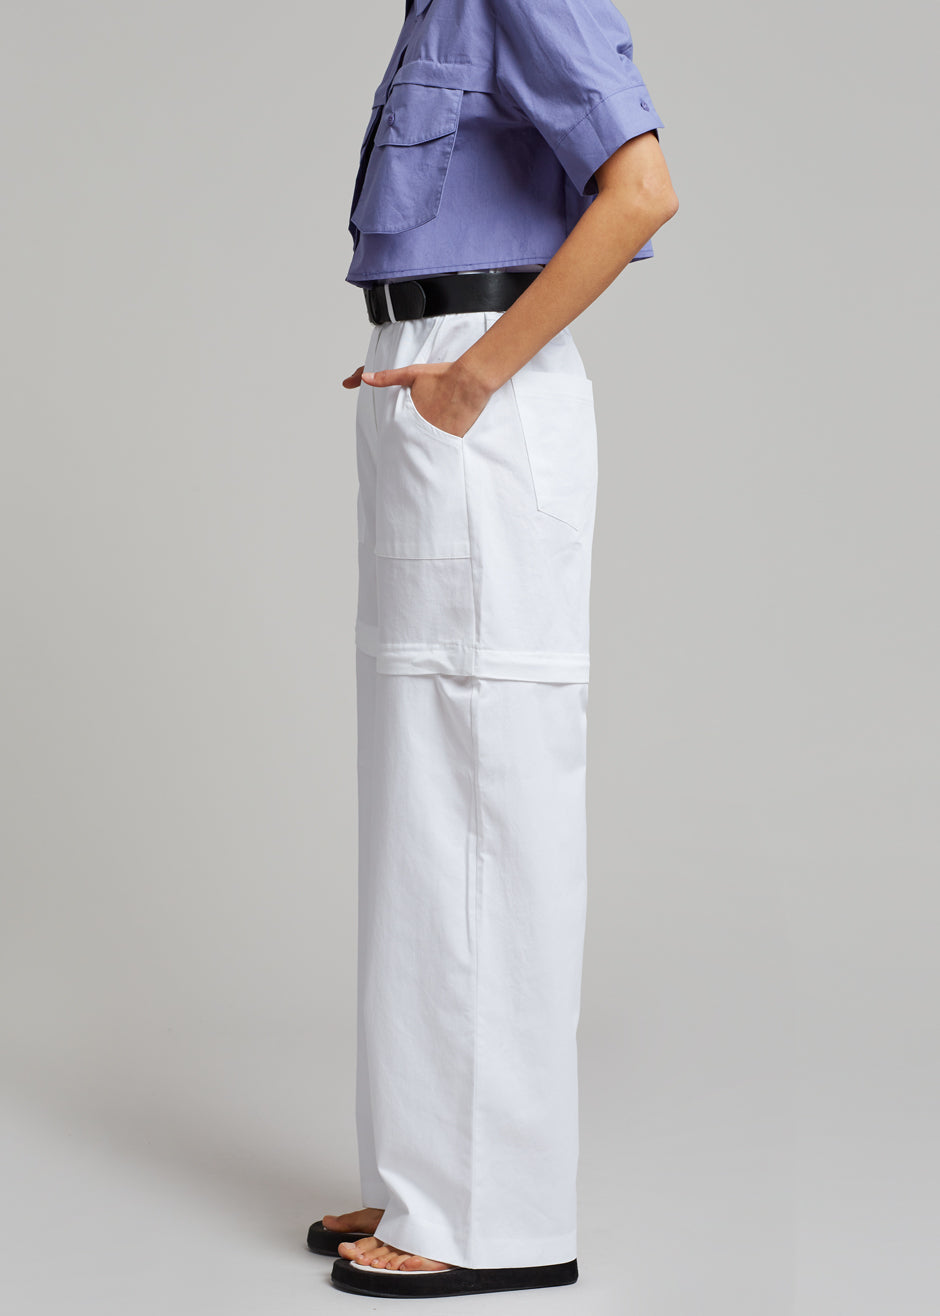 Mada Belted Pants - White - 6